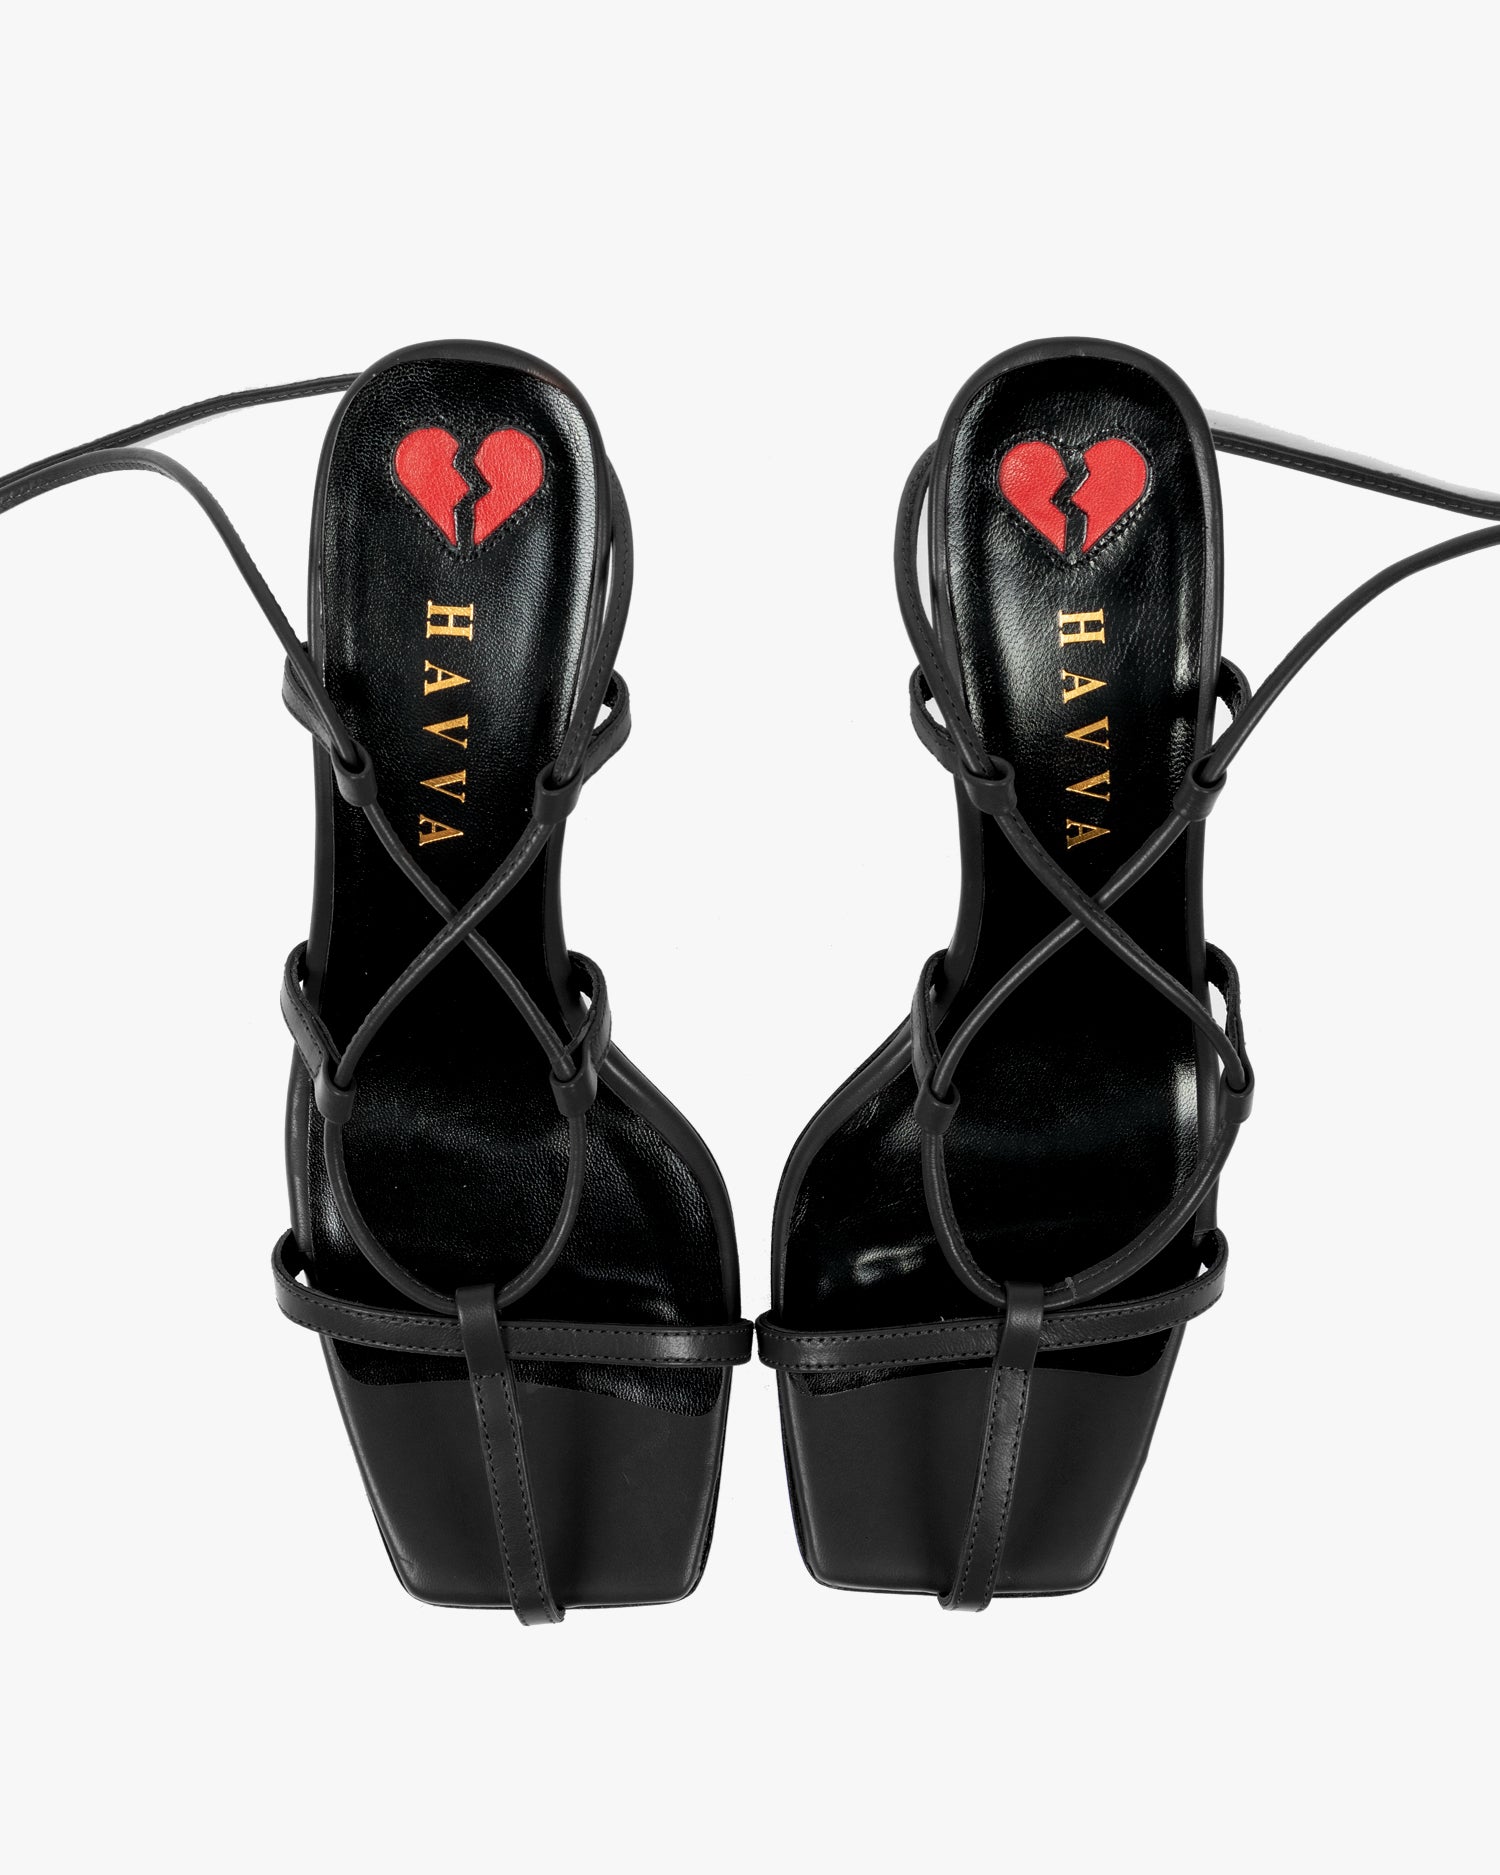 HAVVA HB lace up sandal in black leather with red motif heart in sole